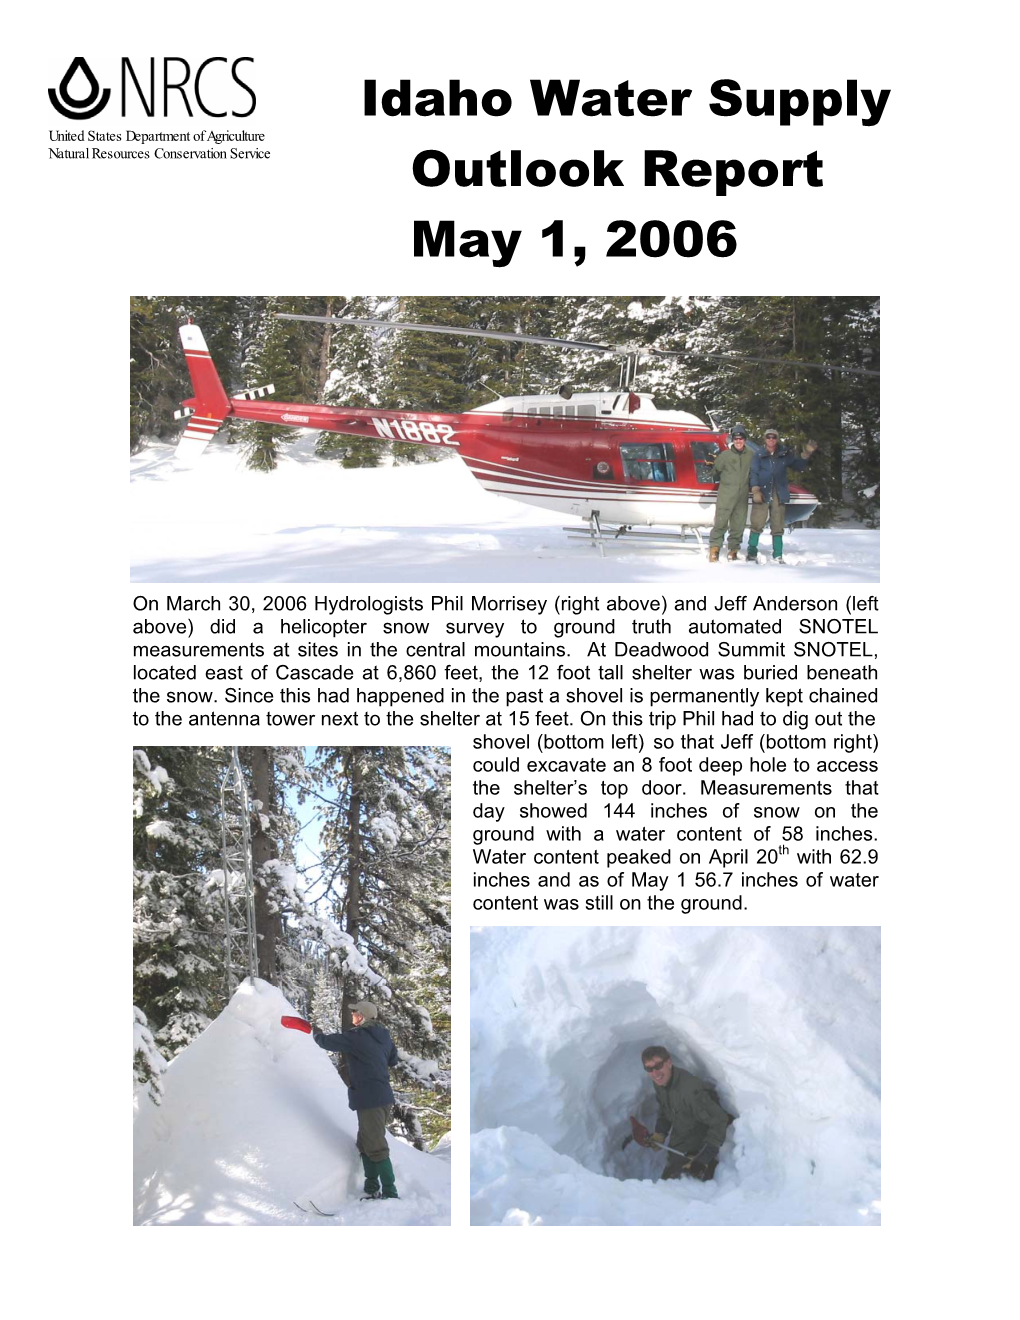 Idaho Water Supply Outlook Report May 1, 2006